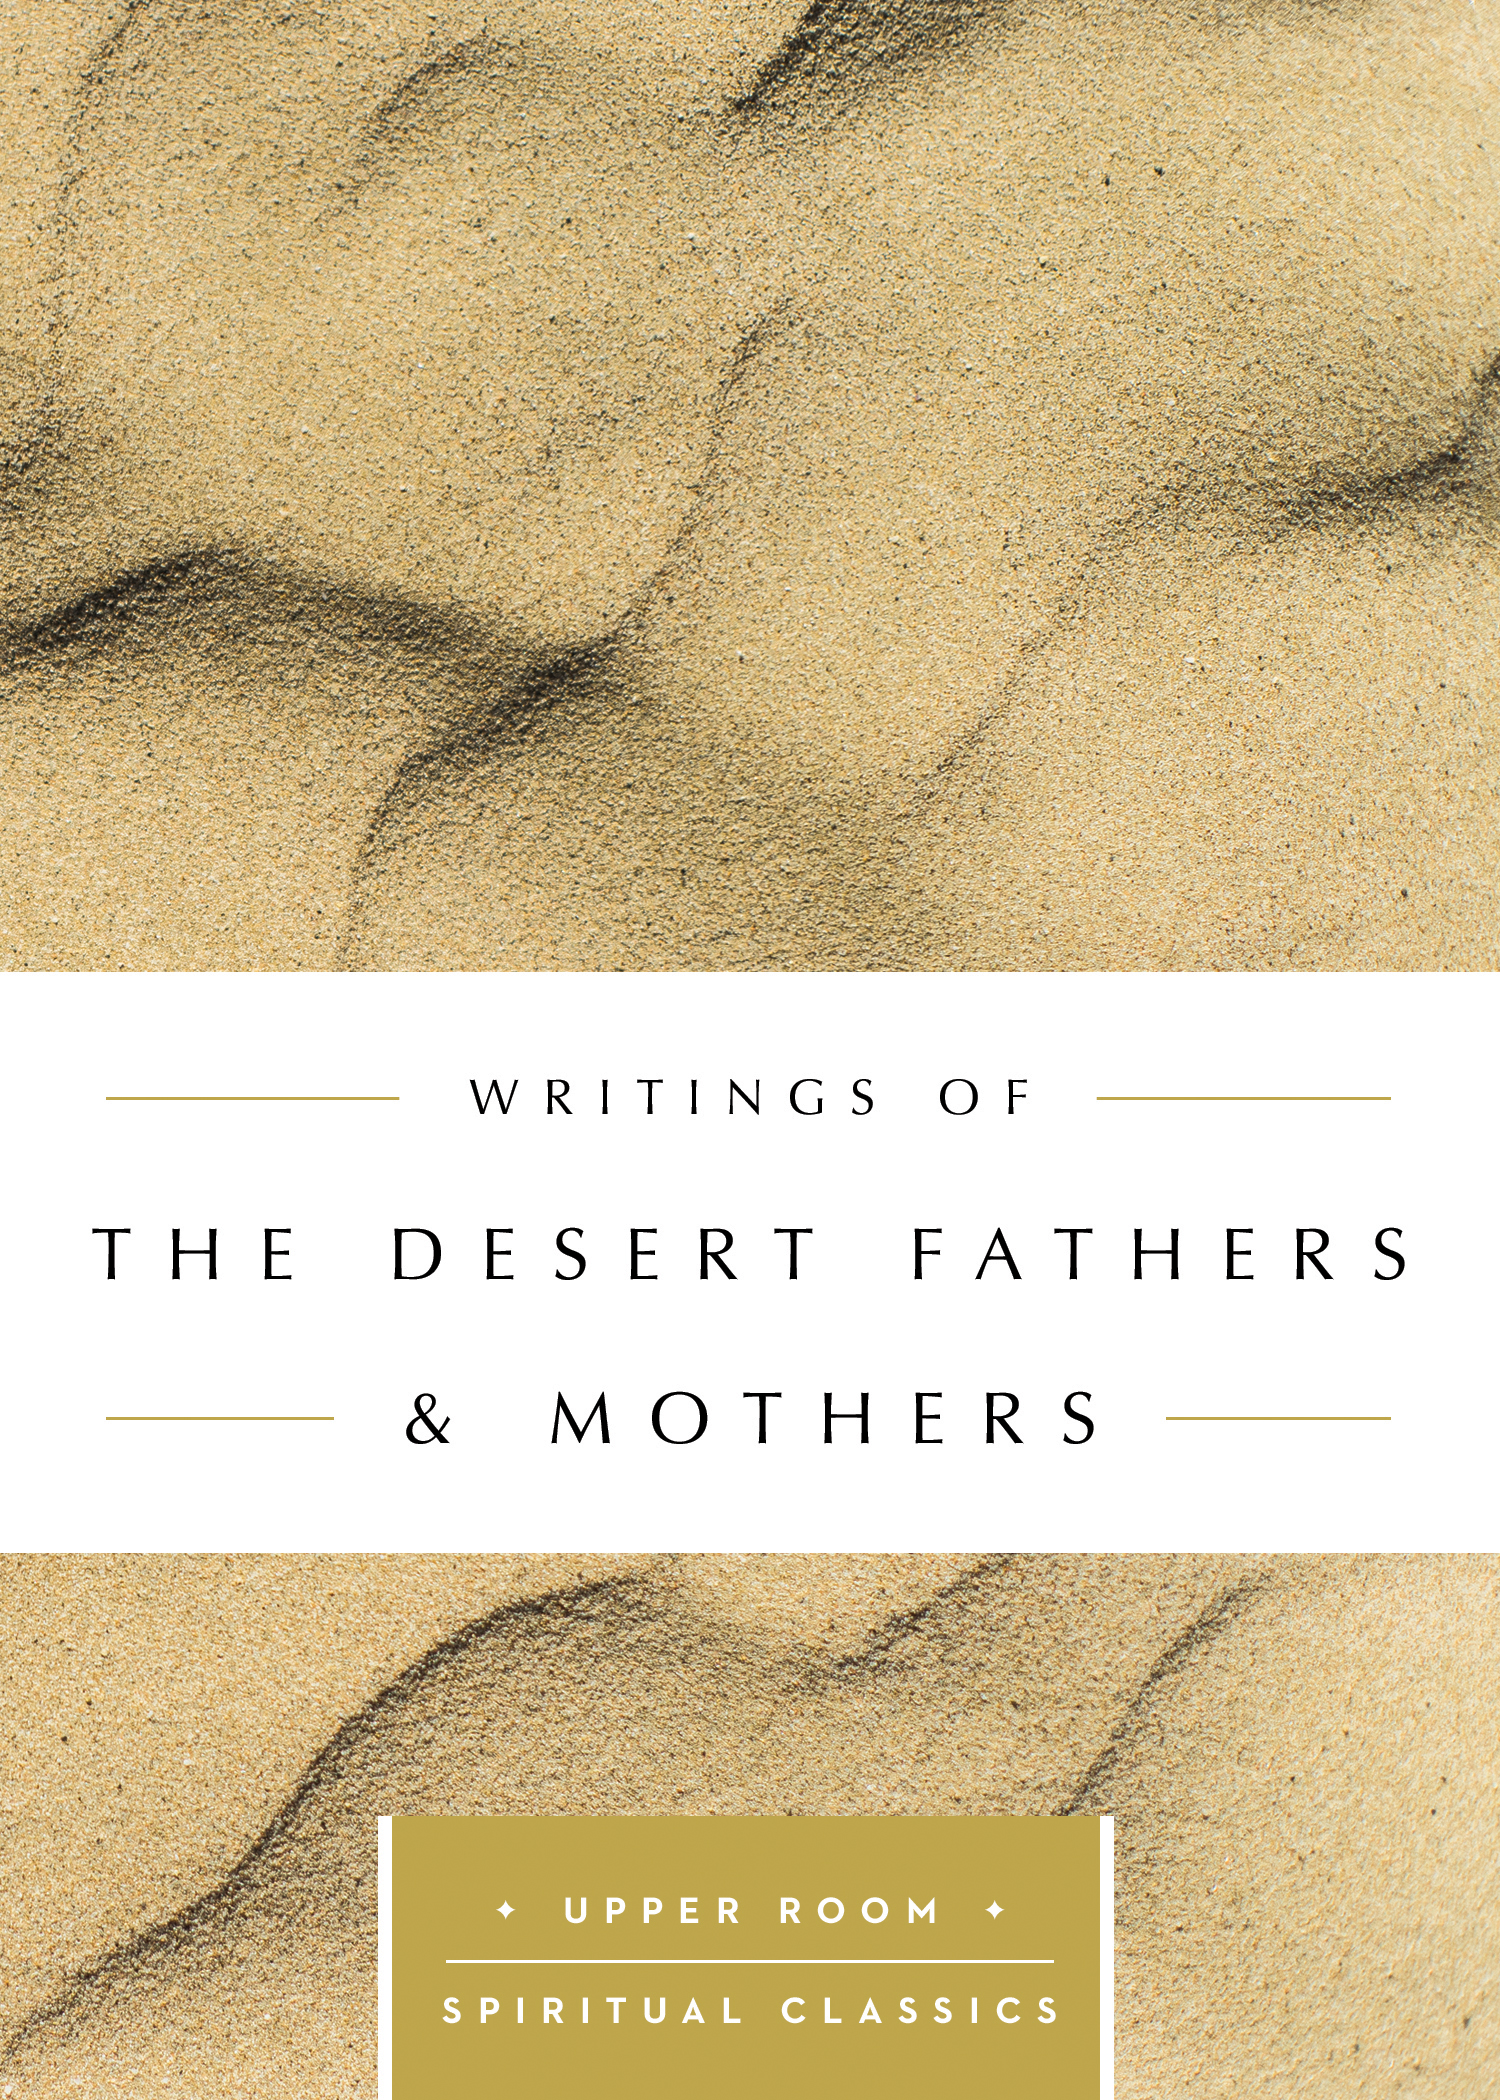 Writings of the Desert Fathers & Mothers